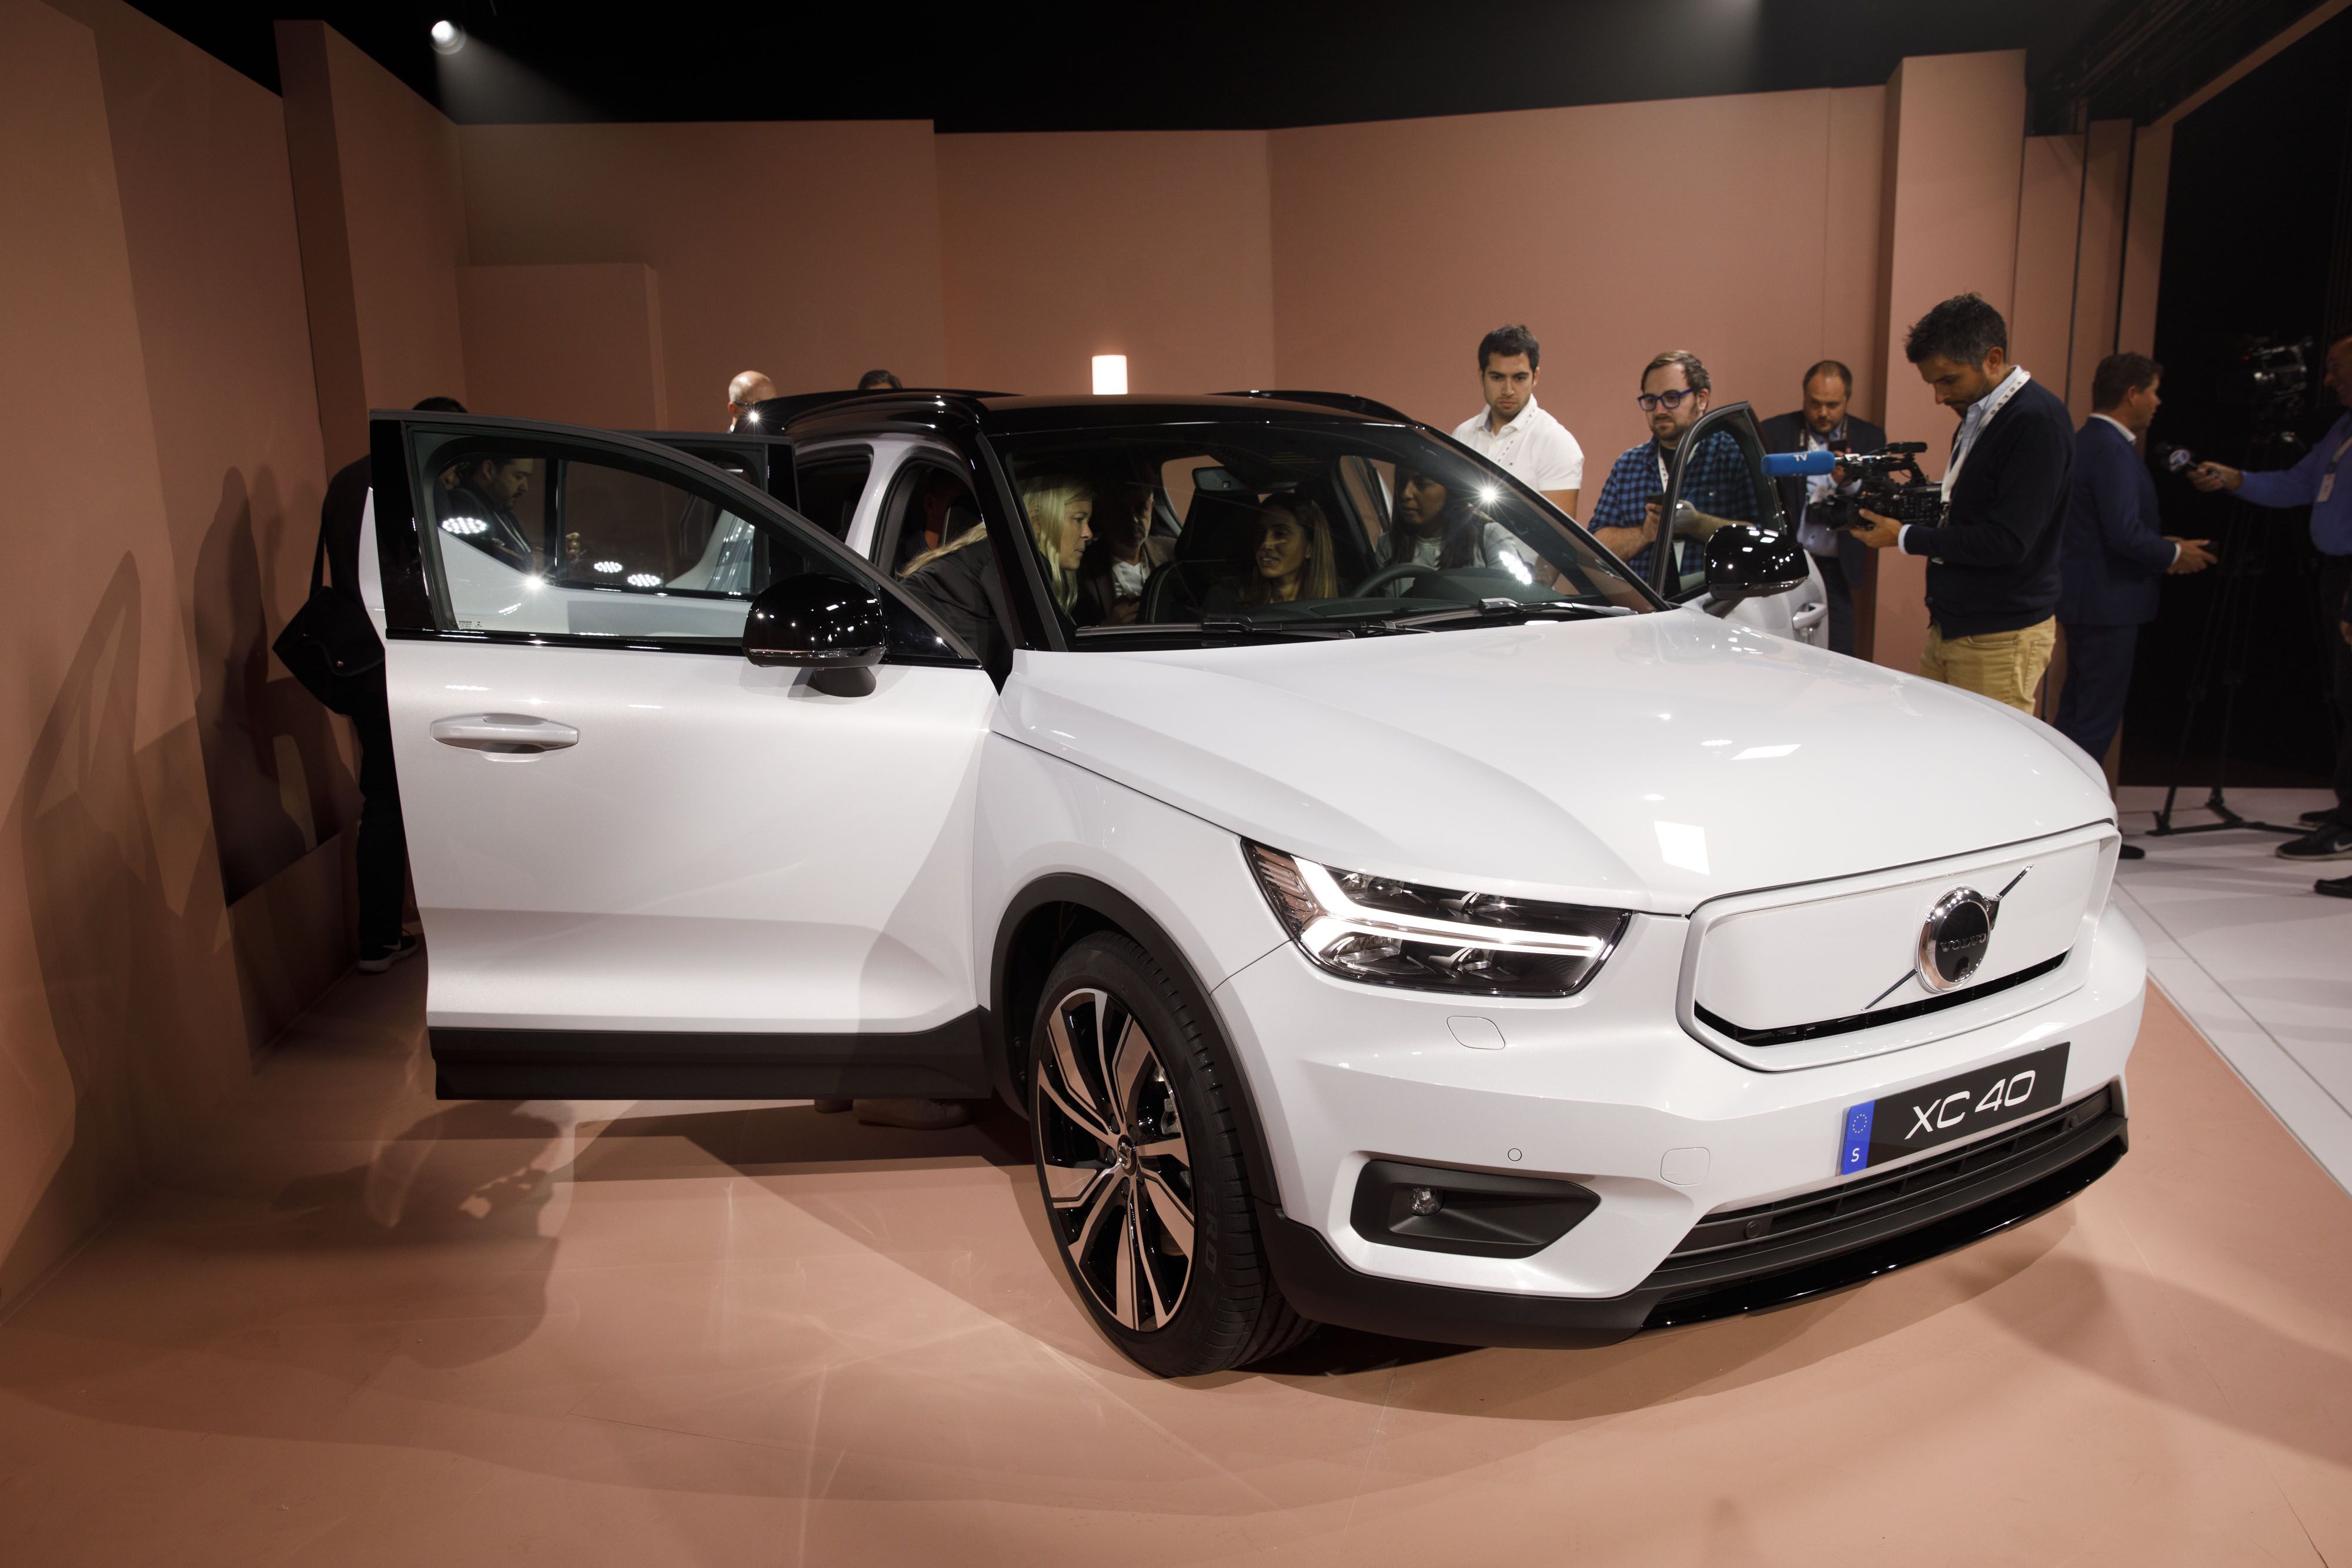 The Volvo XC40 Recharge electric sports utility vehicle (SUV) is displayed during an unveiling event in Los Angeles, California, U.S., on Wednesday, Oct. 16, 2019. Volvo is tying the launch of its first all-electric vehicle to a broader plan for shrinking the carbon footprint of its models by 40% through 2025. Photographer: Patrick T. Fallon/Bloomberg